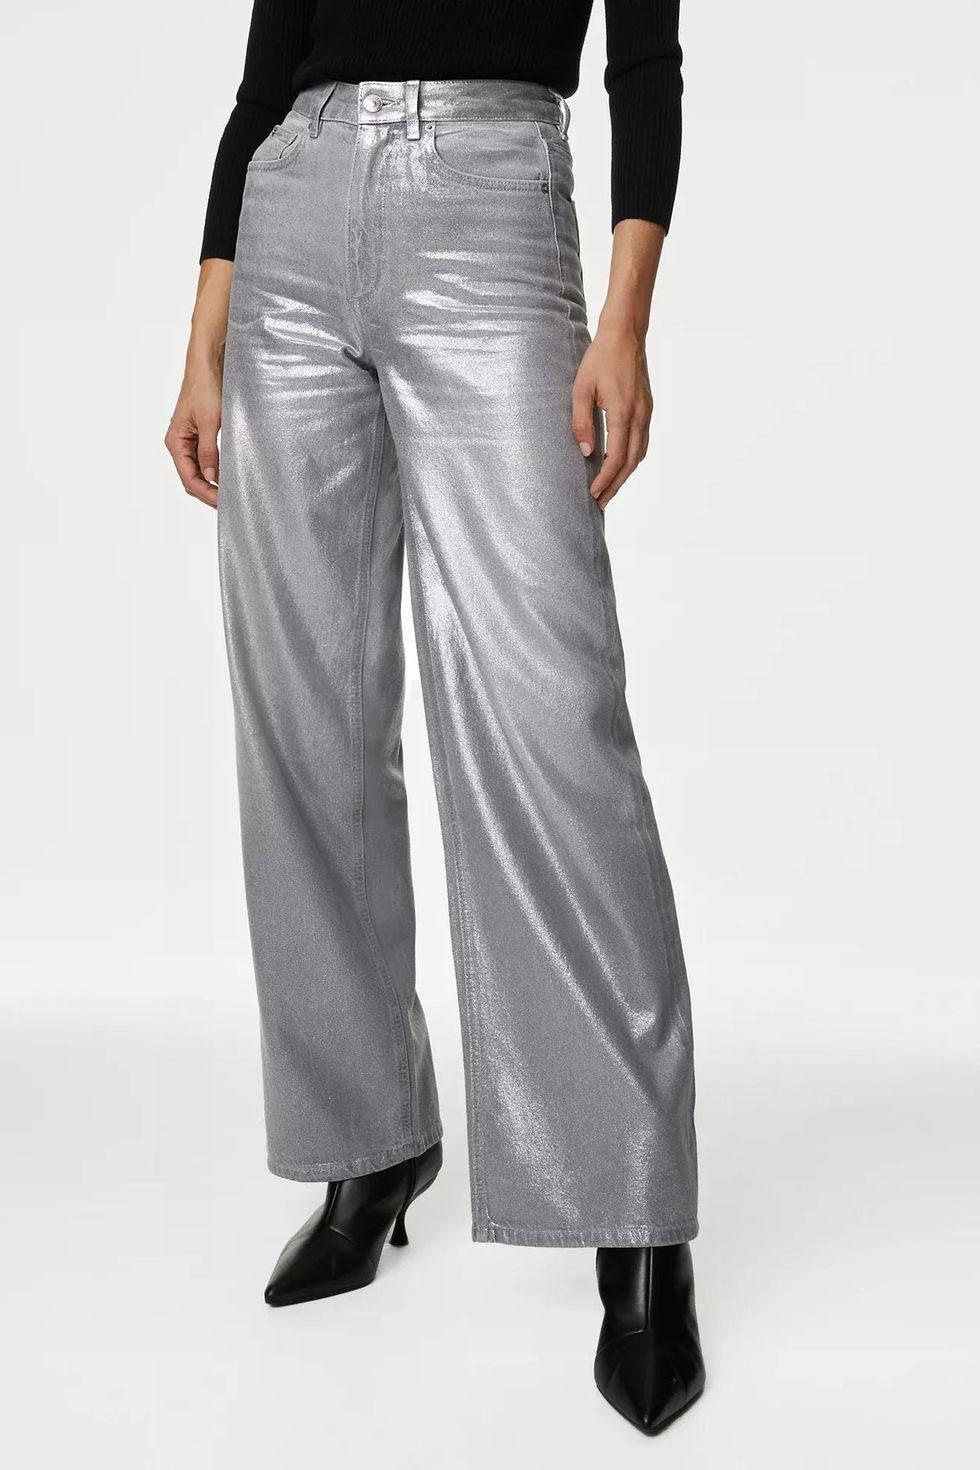 How to do the silver trouser trend